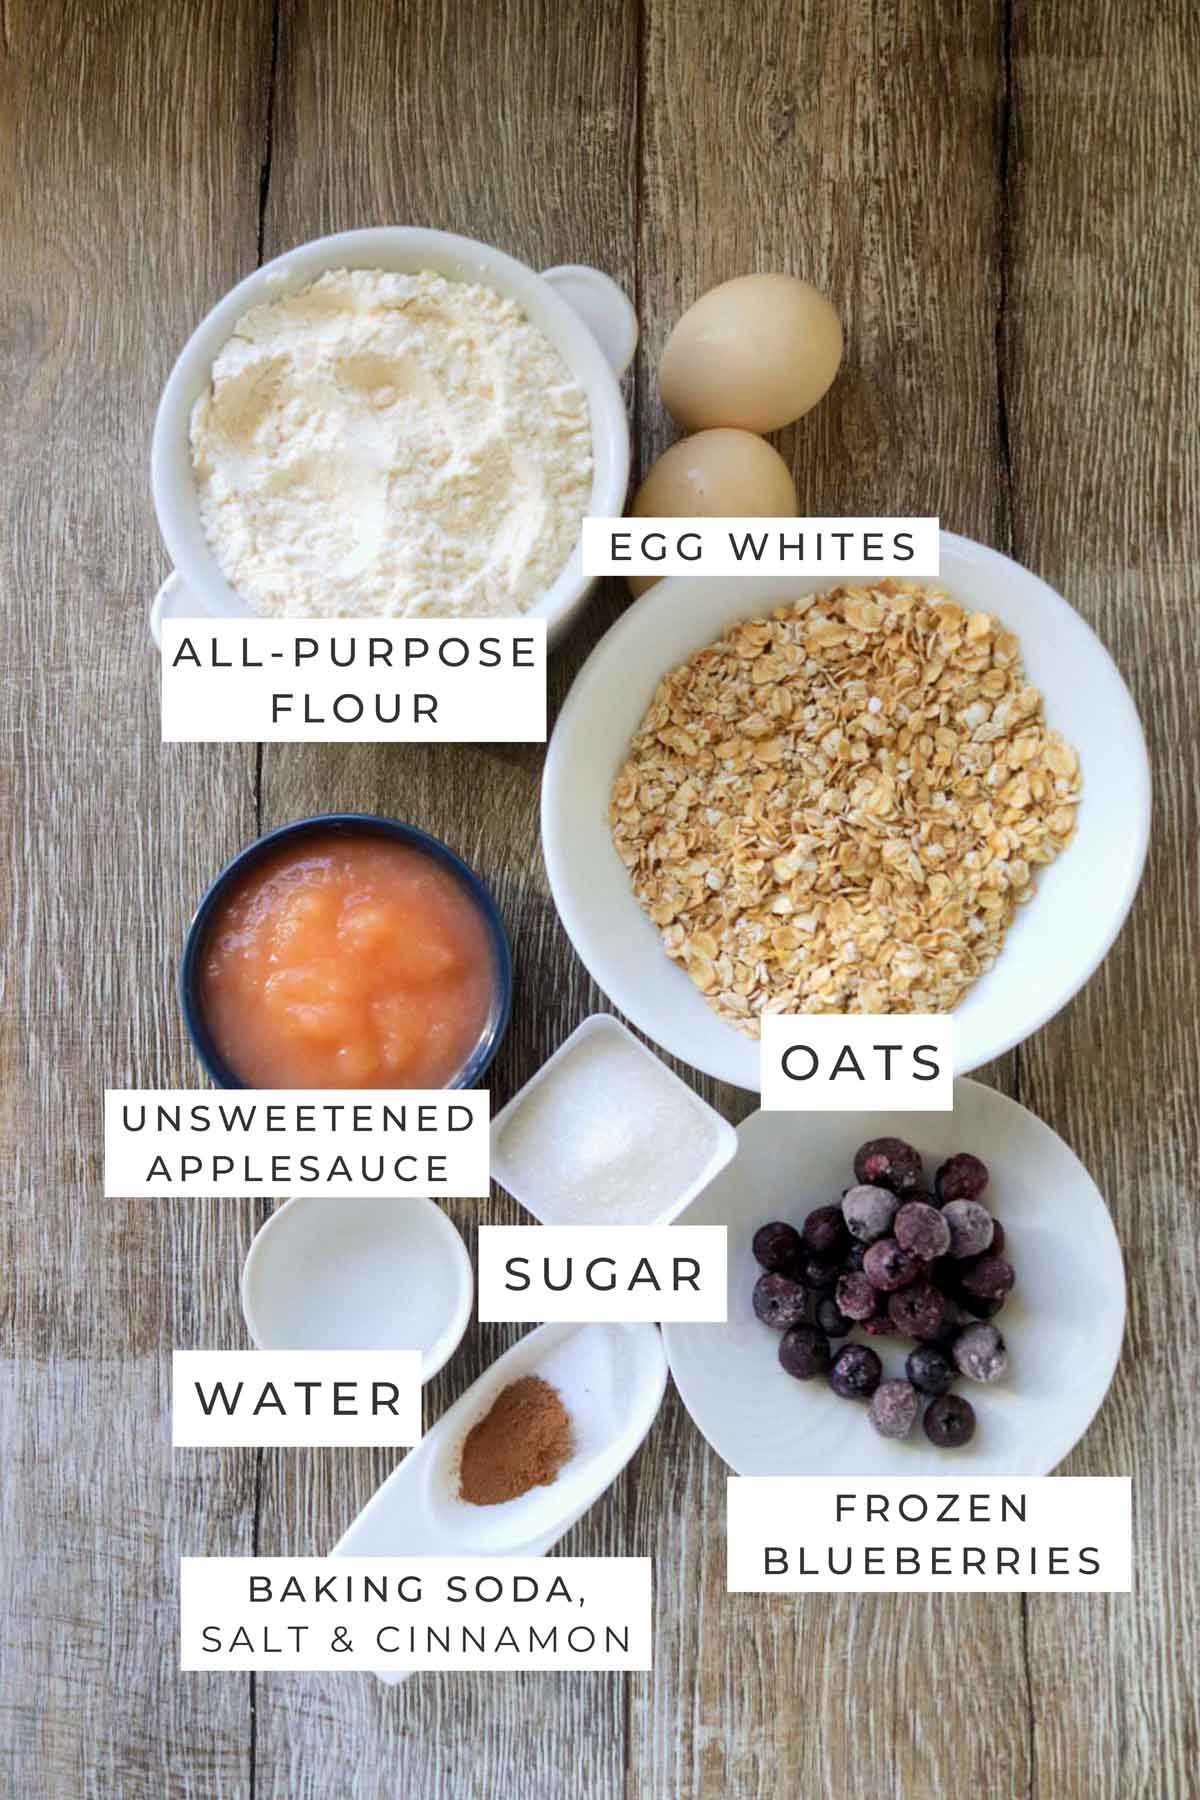 Labeled ingredients for the blueberry muffins.